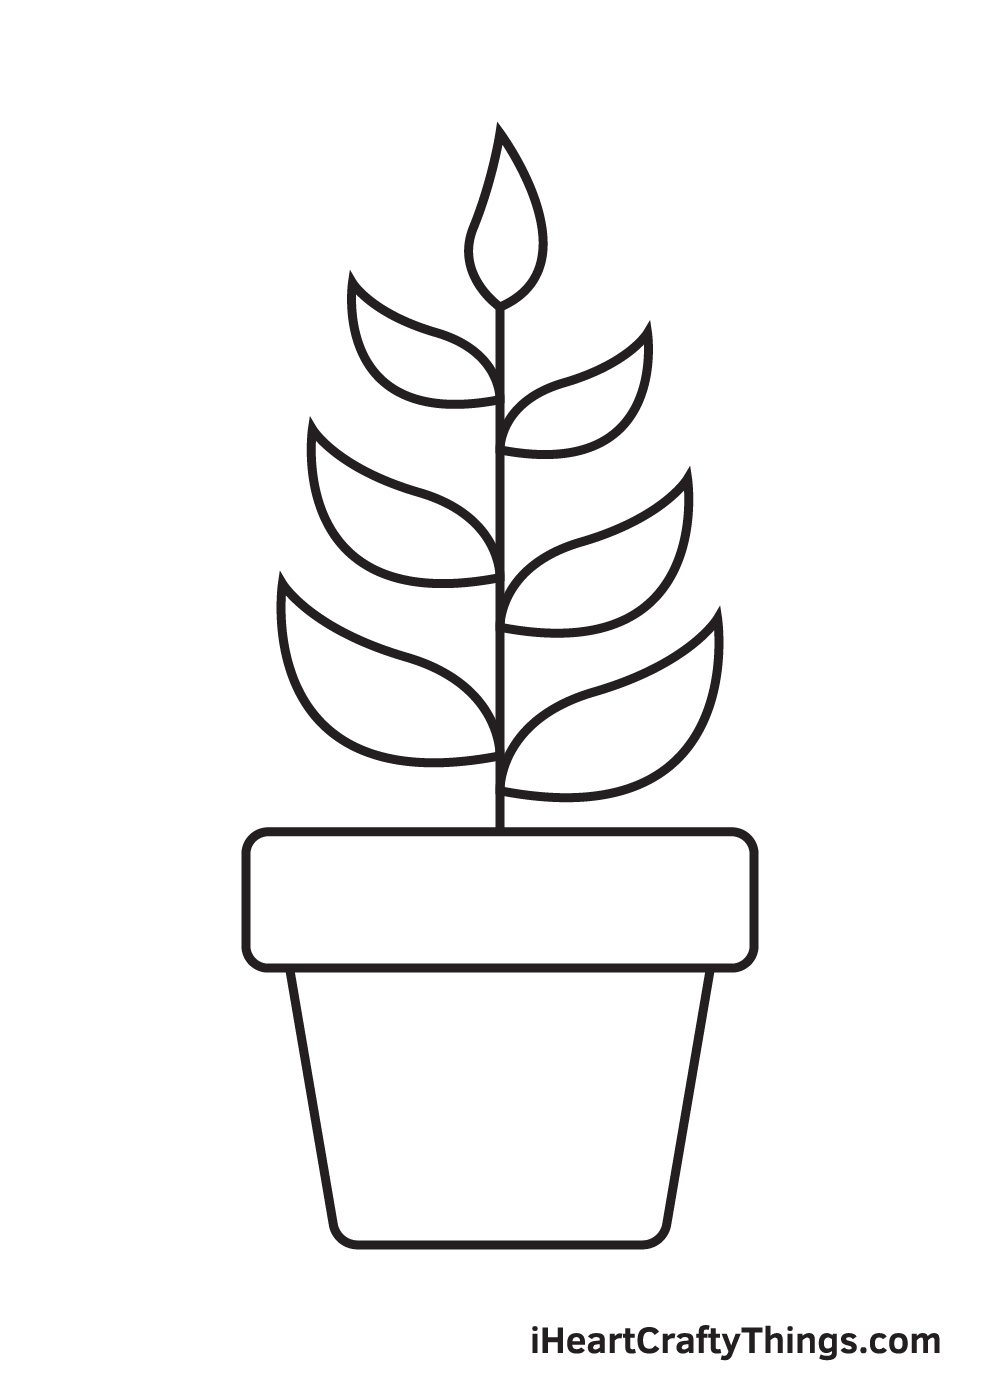 Plant drawing - Step 9